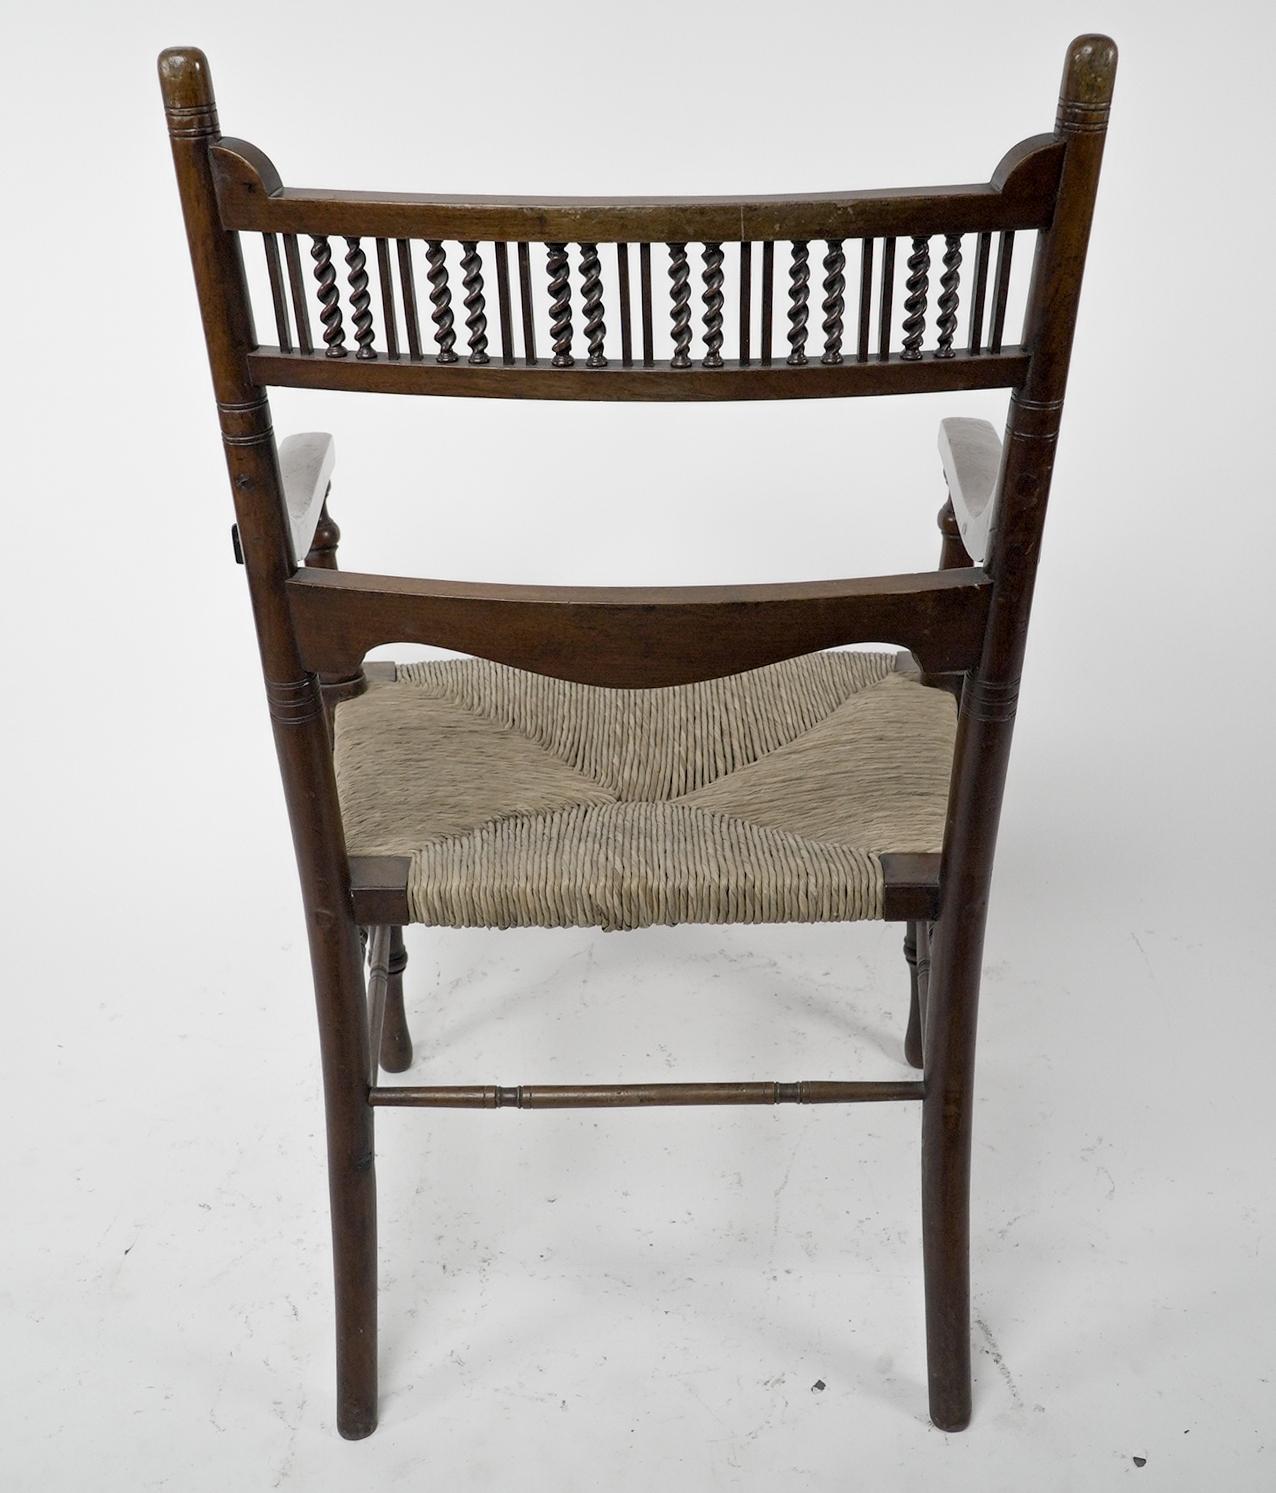 George Bell & George Freeth Roper Aesthetic Movement Walnut rush seat armchair. For Sale 13